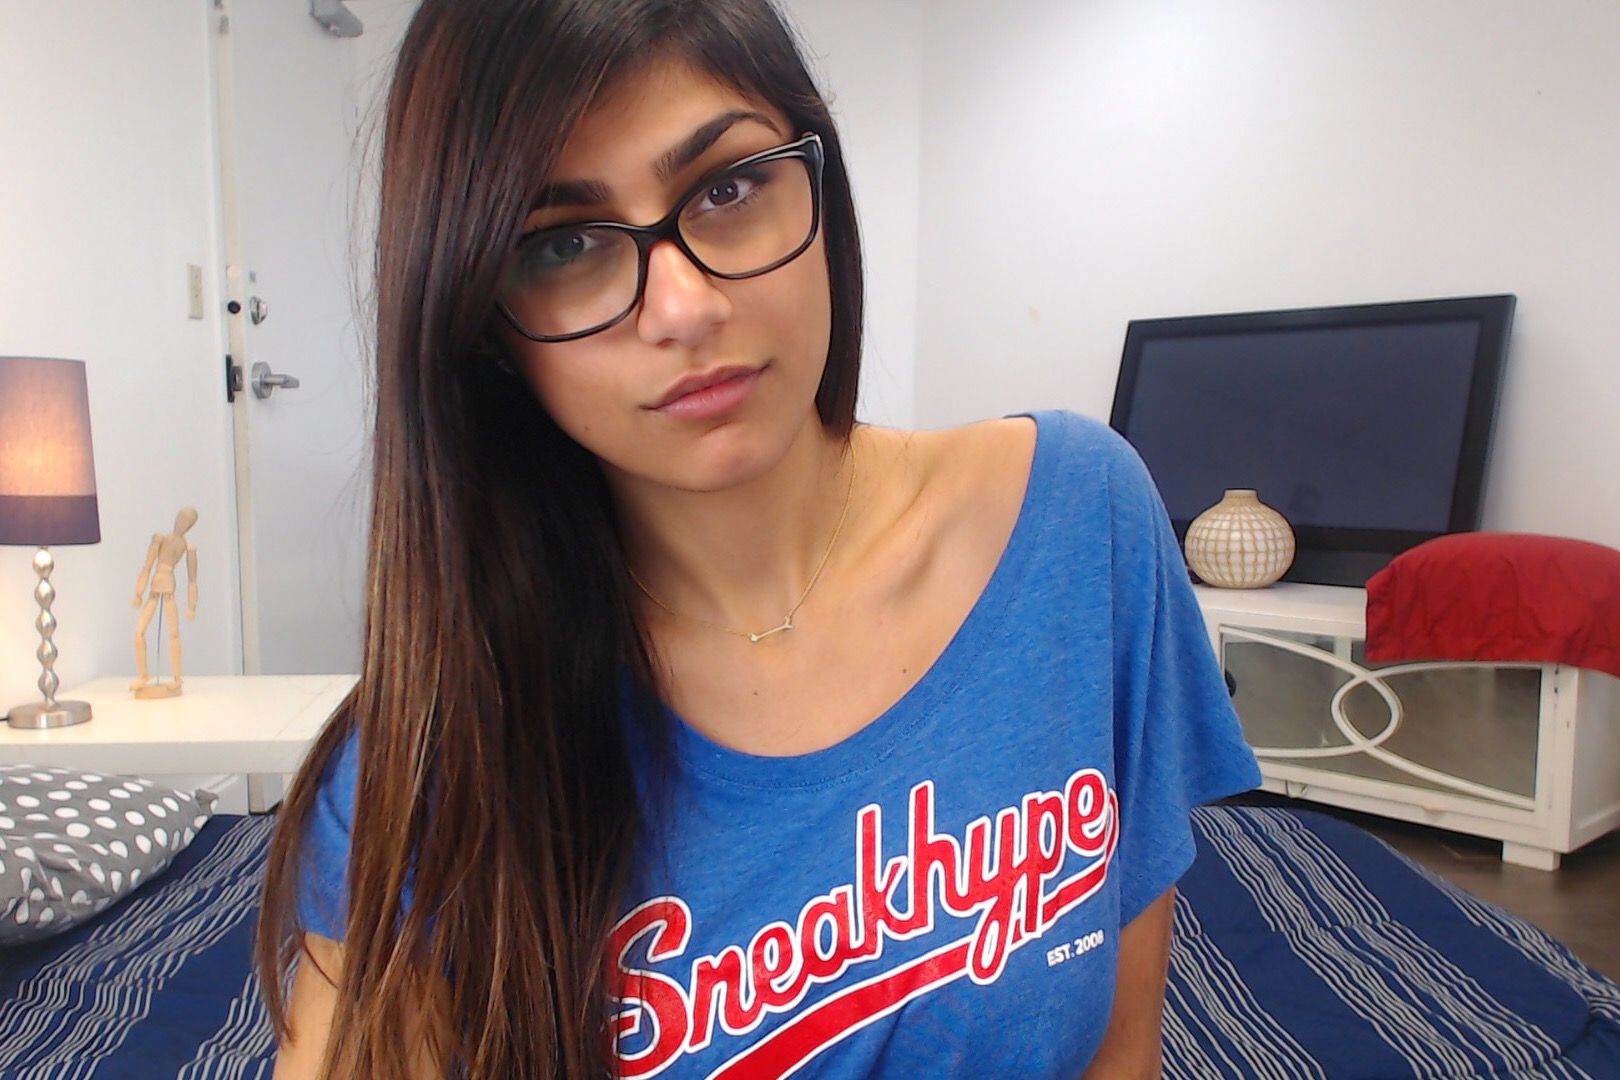 Ex-adult star Mia Khalifa wins the Internet with her latest move; puts up her glasses for auction to support Lebanon